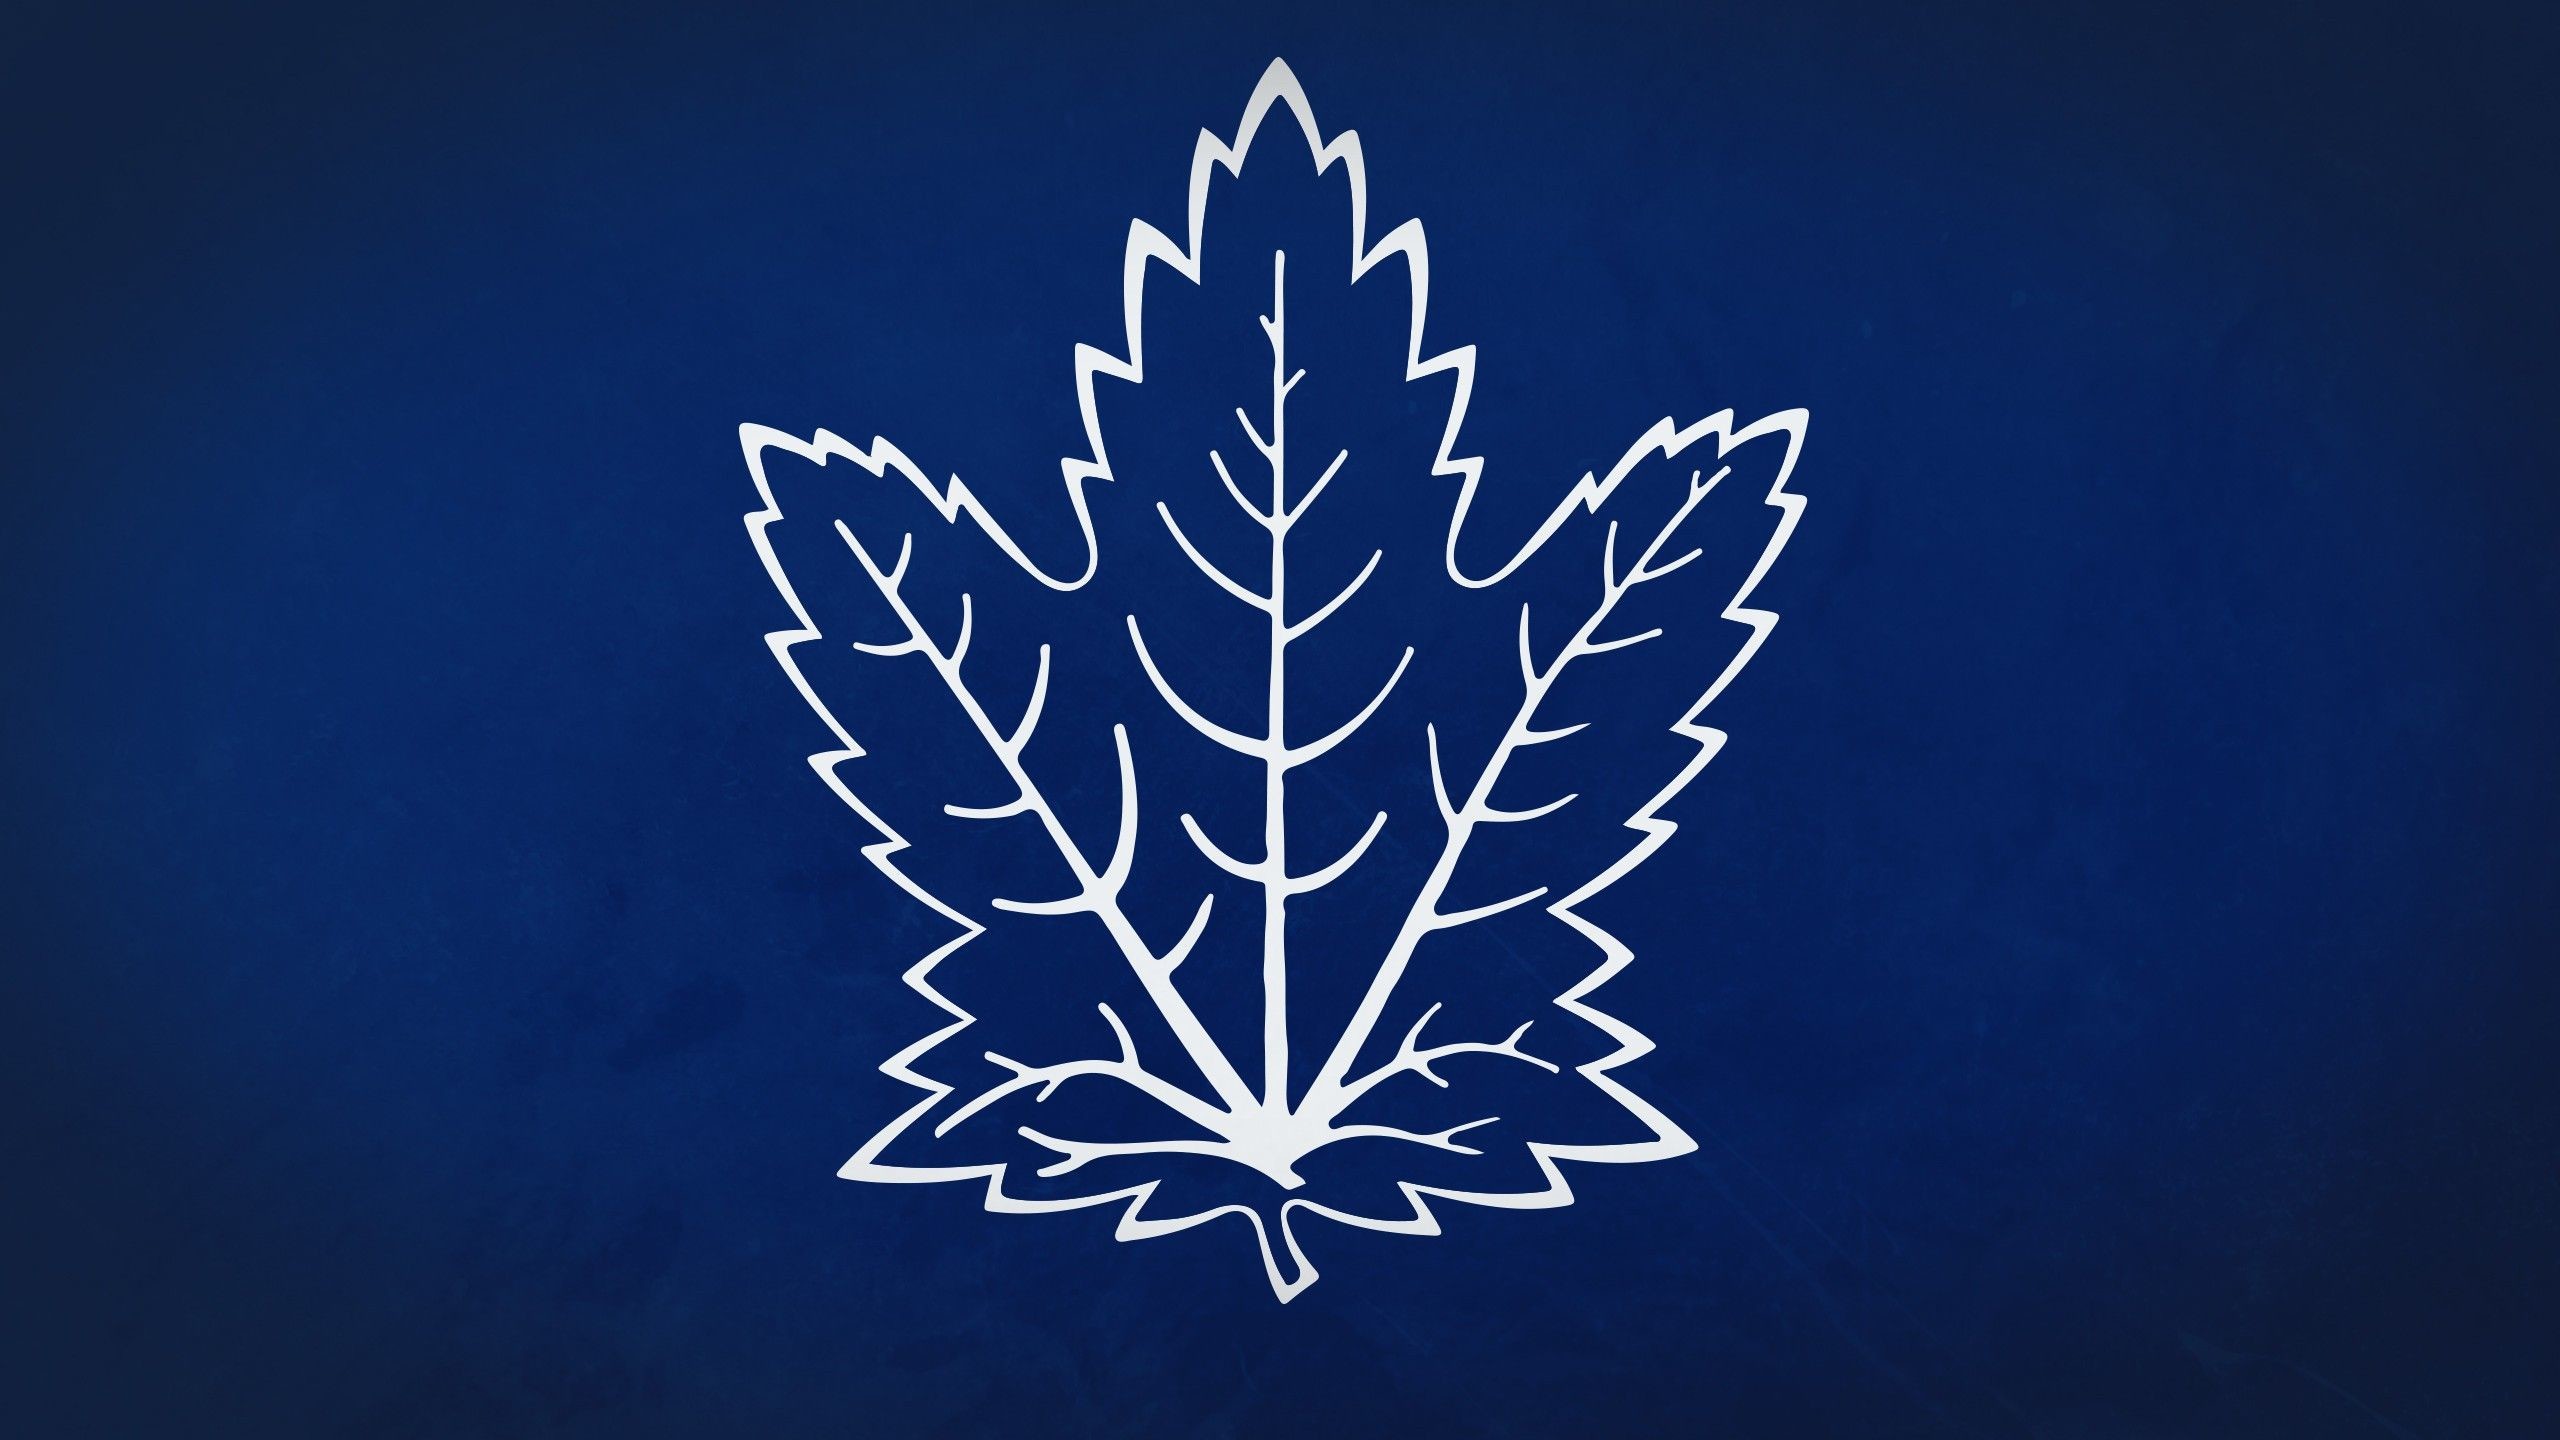 2560x1440 Toronto Maple Leafs Wallpapers | Toronto Maple Leafs Backgrounds